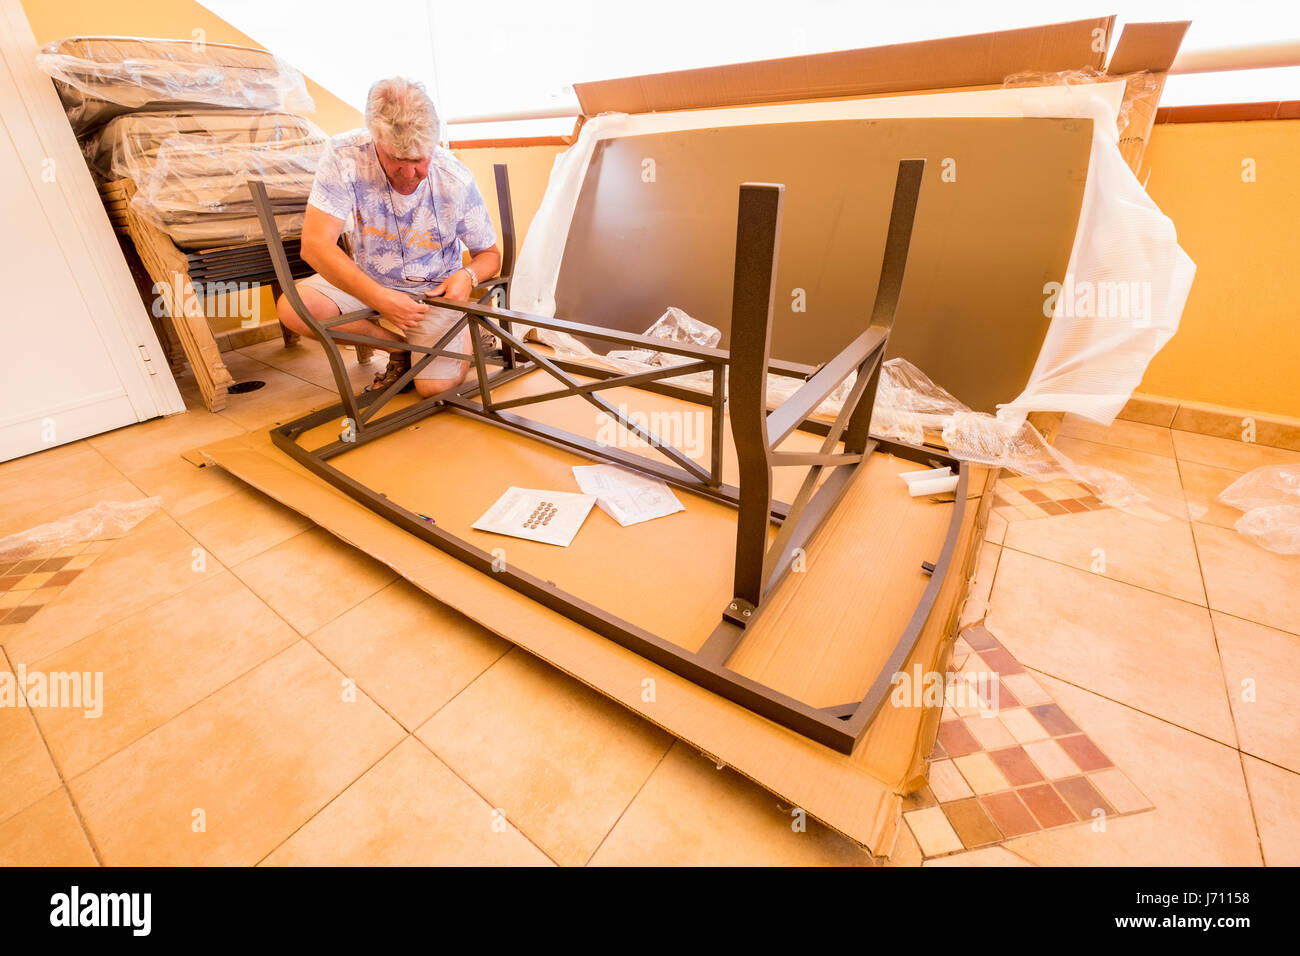 Middle aged man assembling flat packed table on a terrace Stock Photo